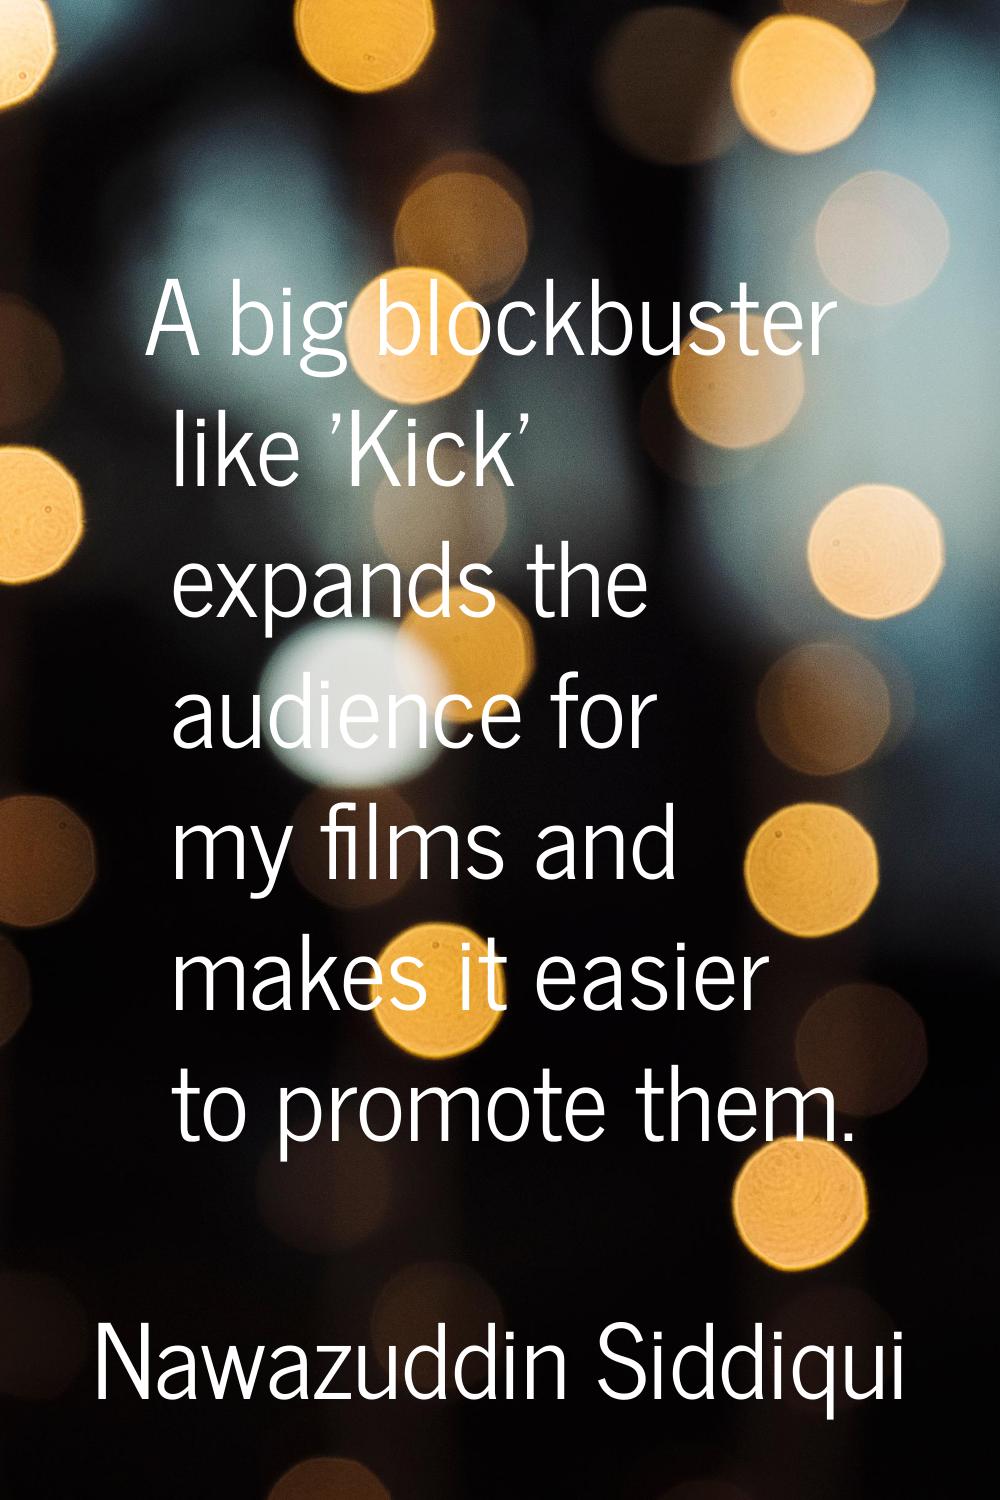 A big blockbuster like 'Kick' expands the audience for my films and makes it easier to promote them